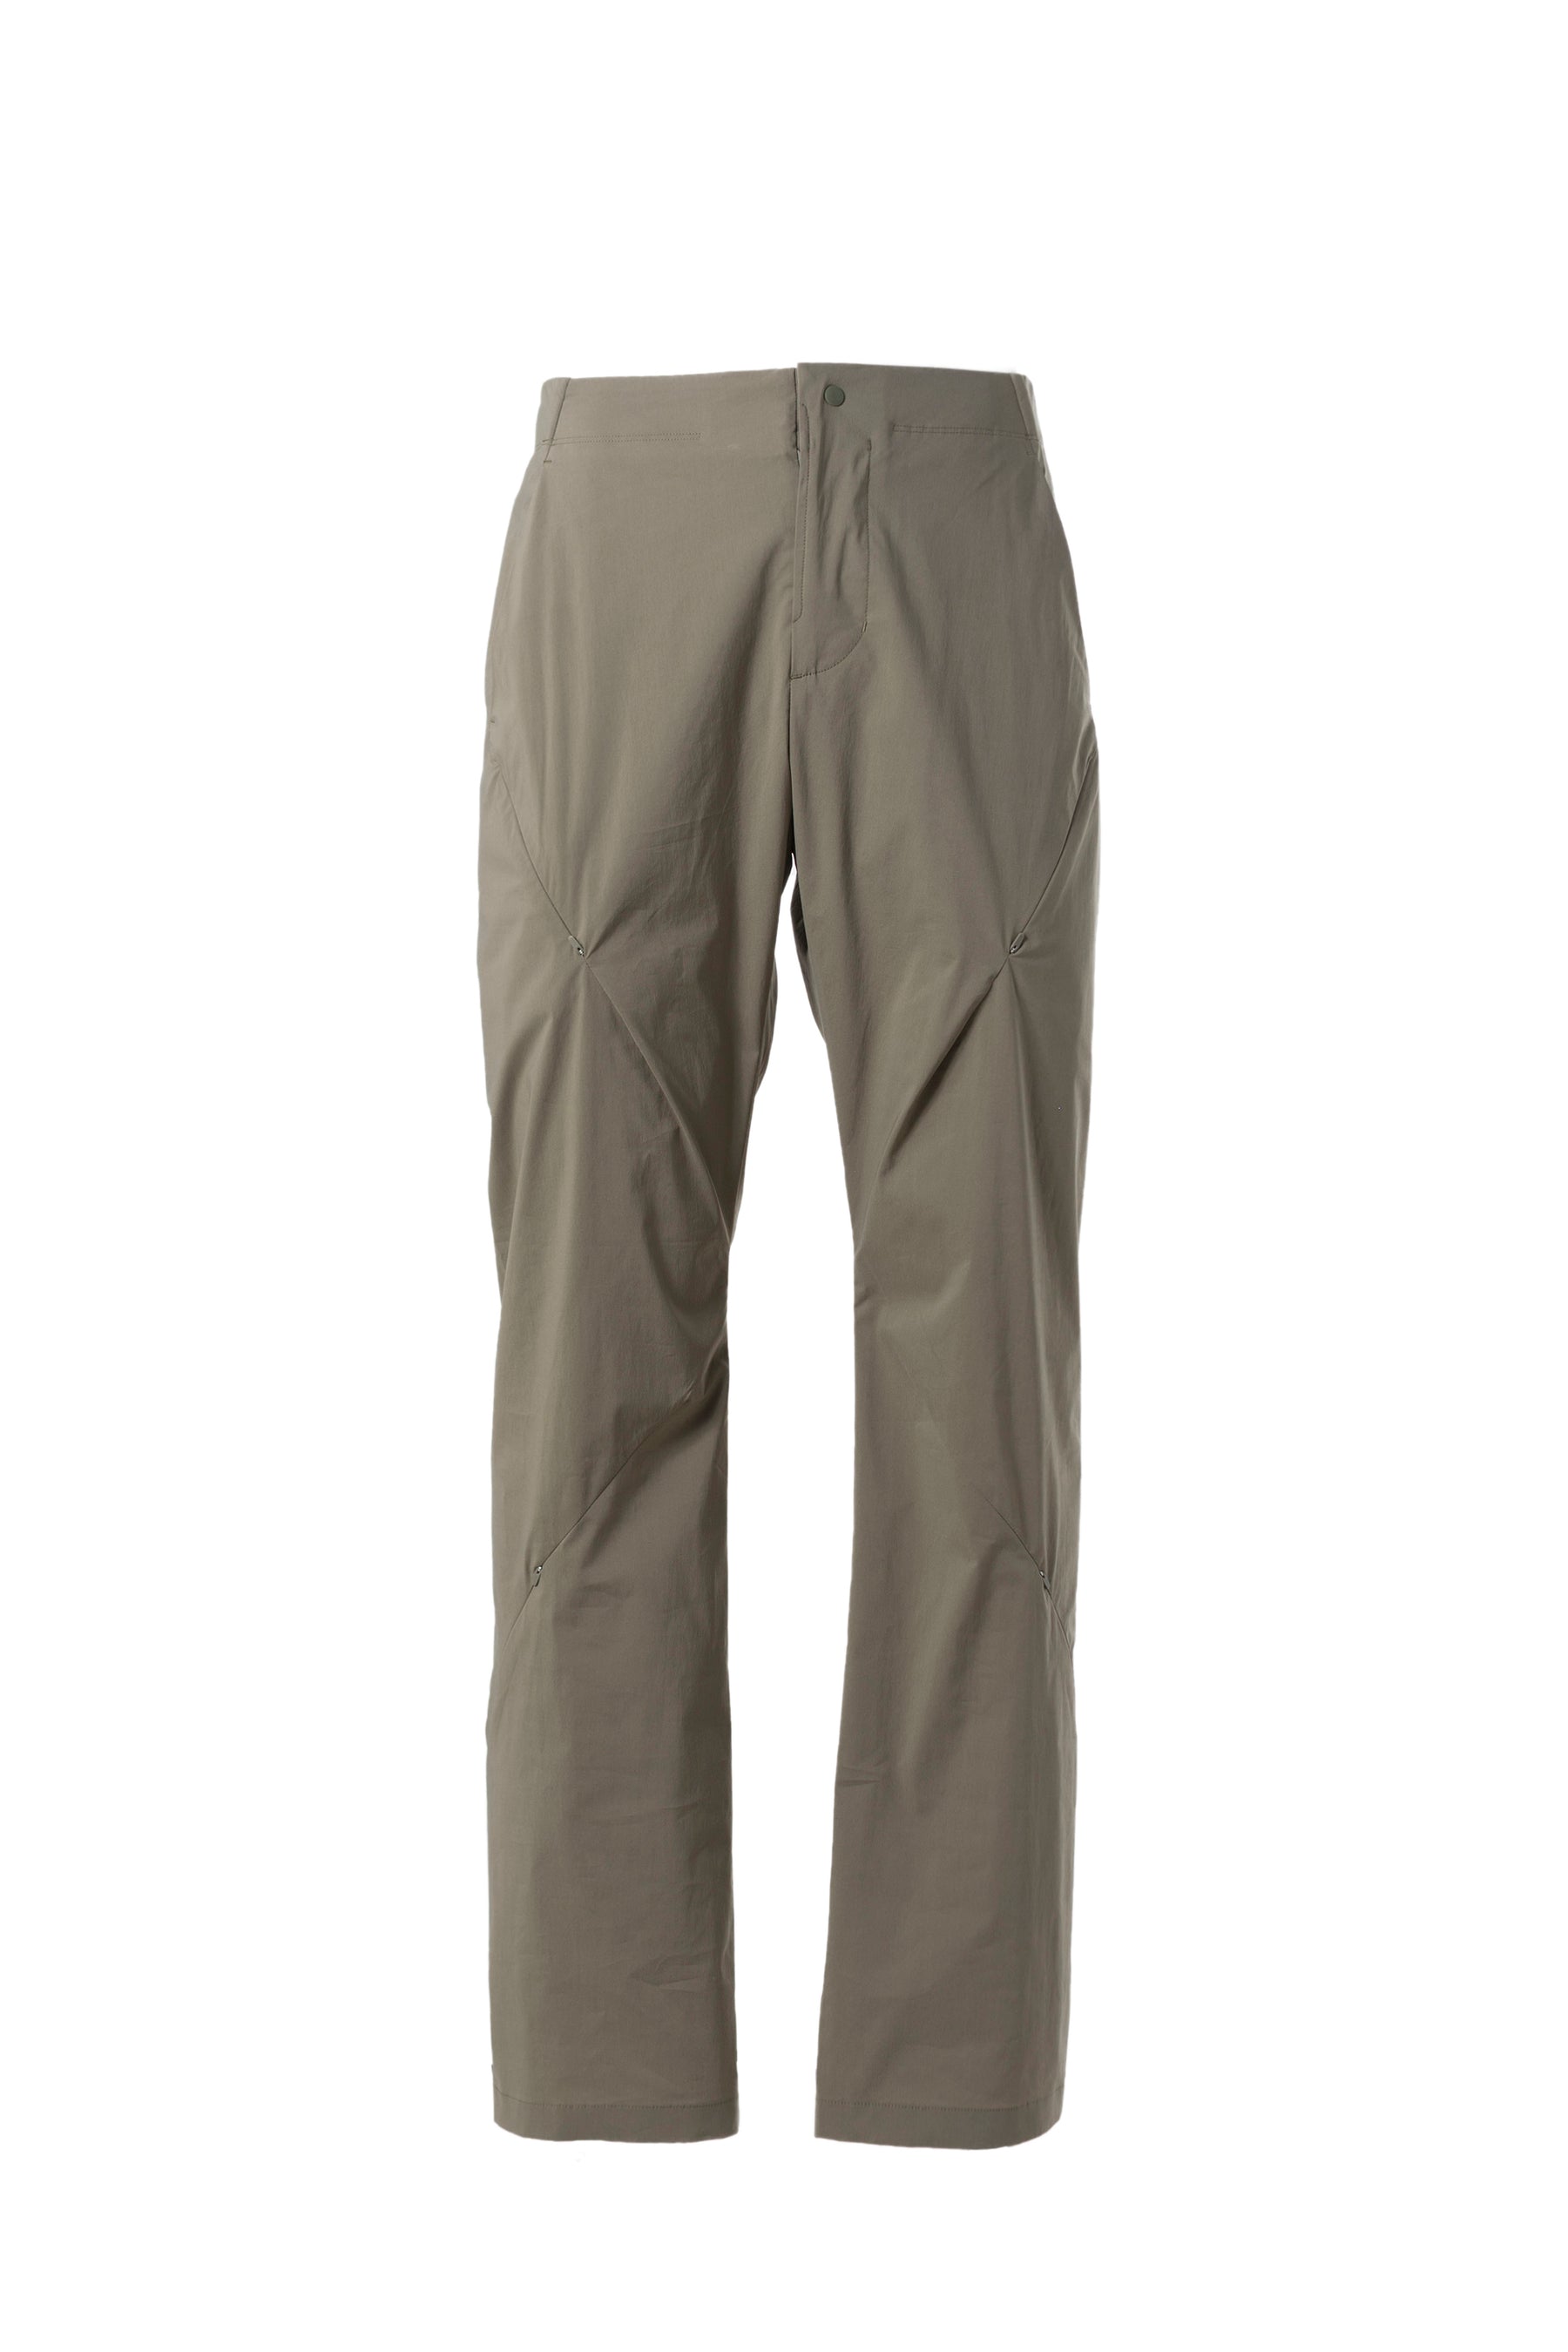 POST ARCHIVE FACTION 5.0 TROUSERS RIGHT-